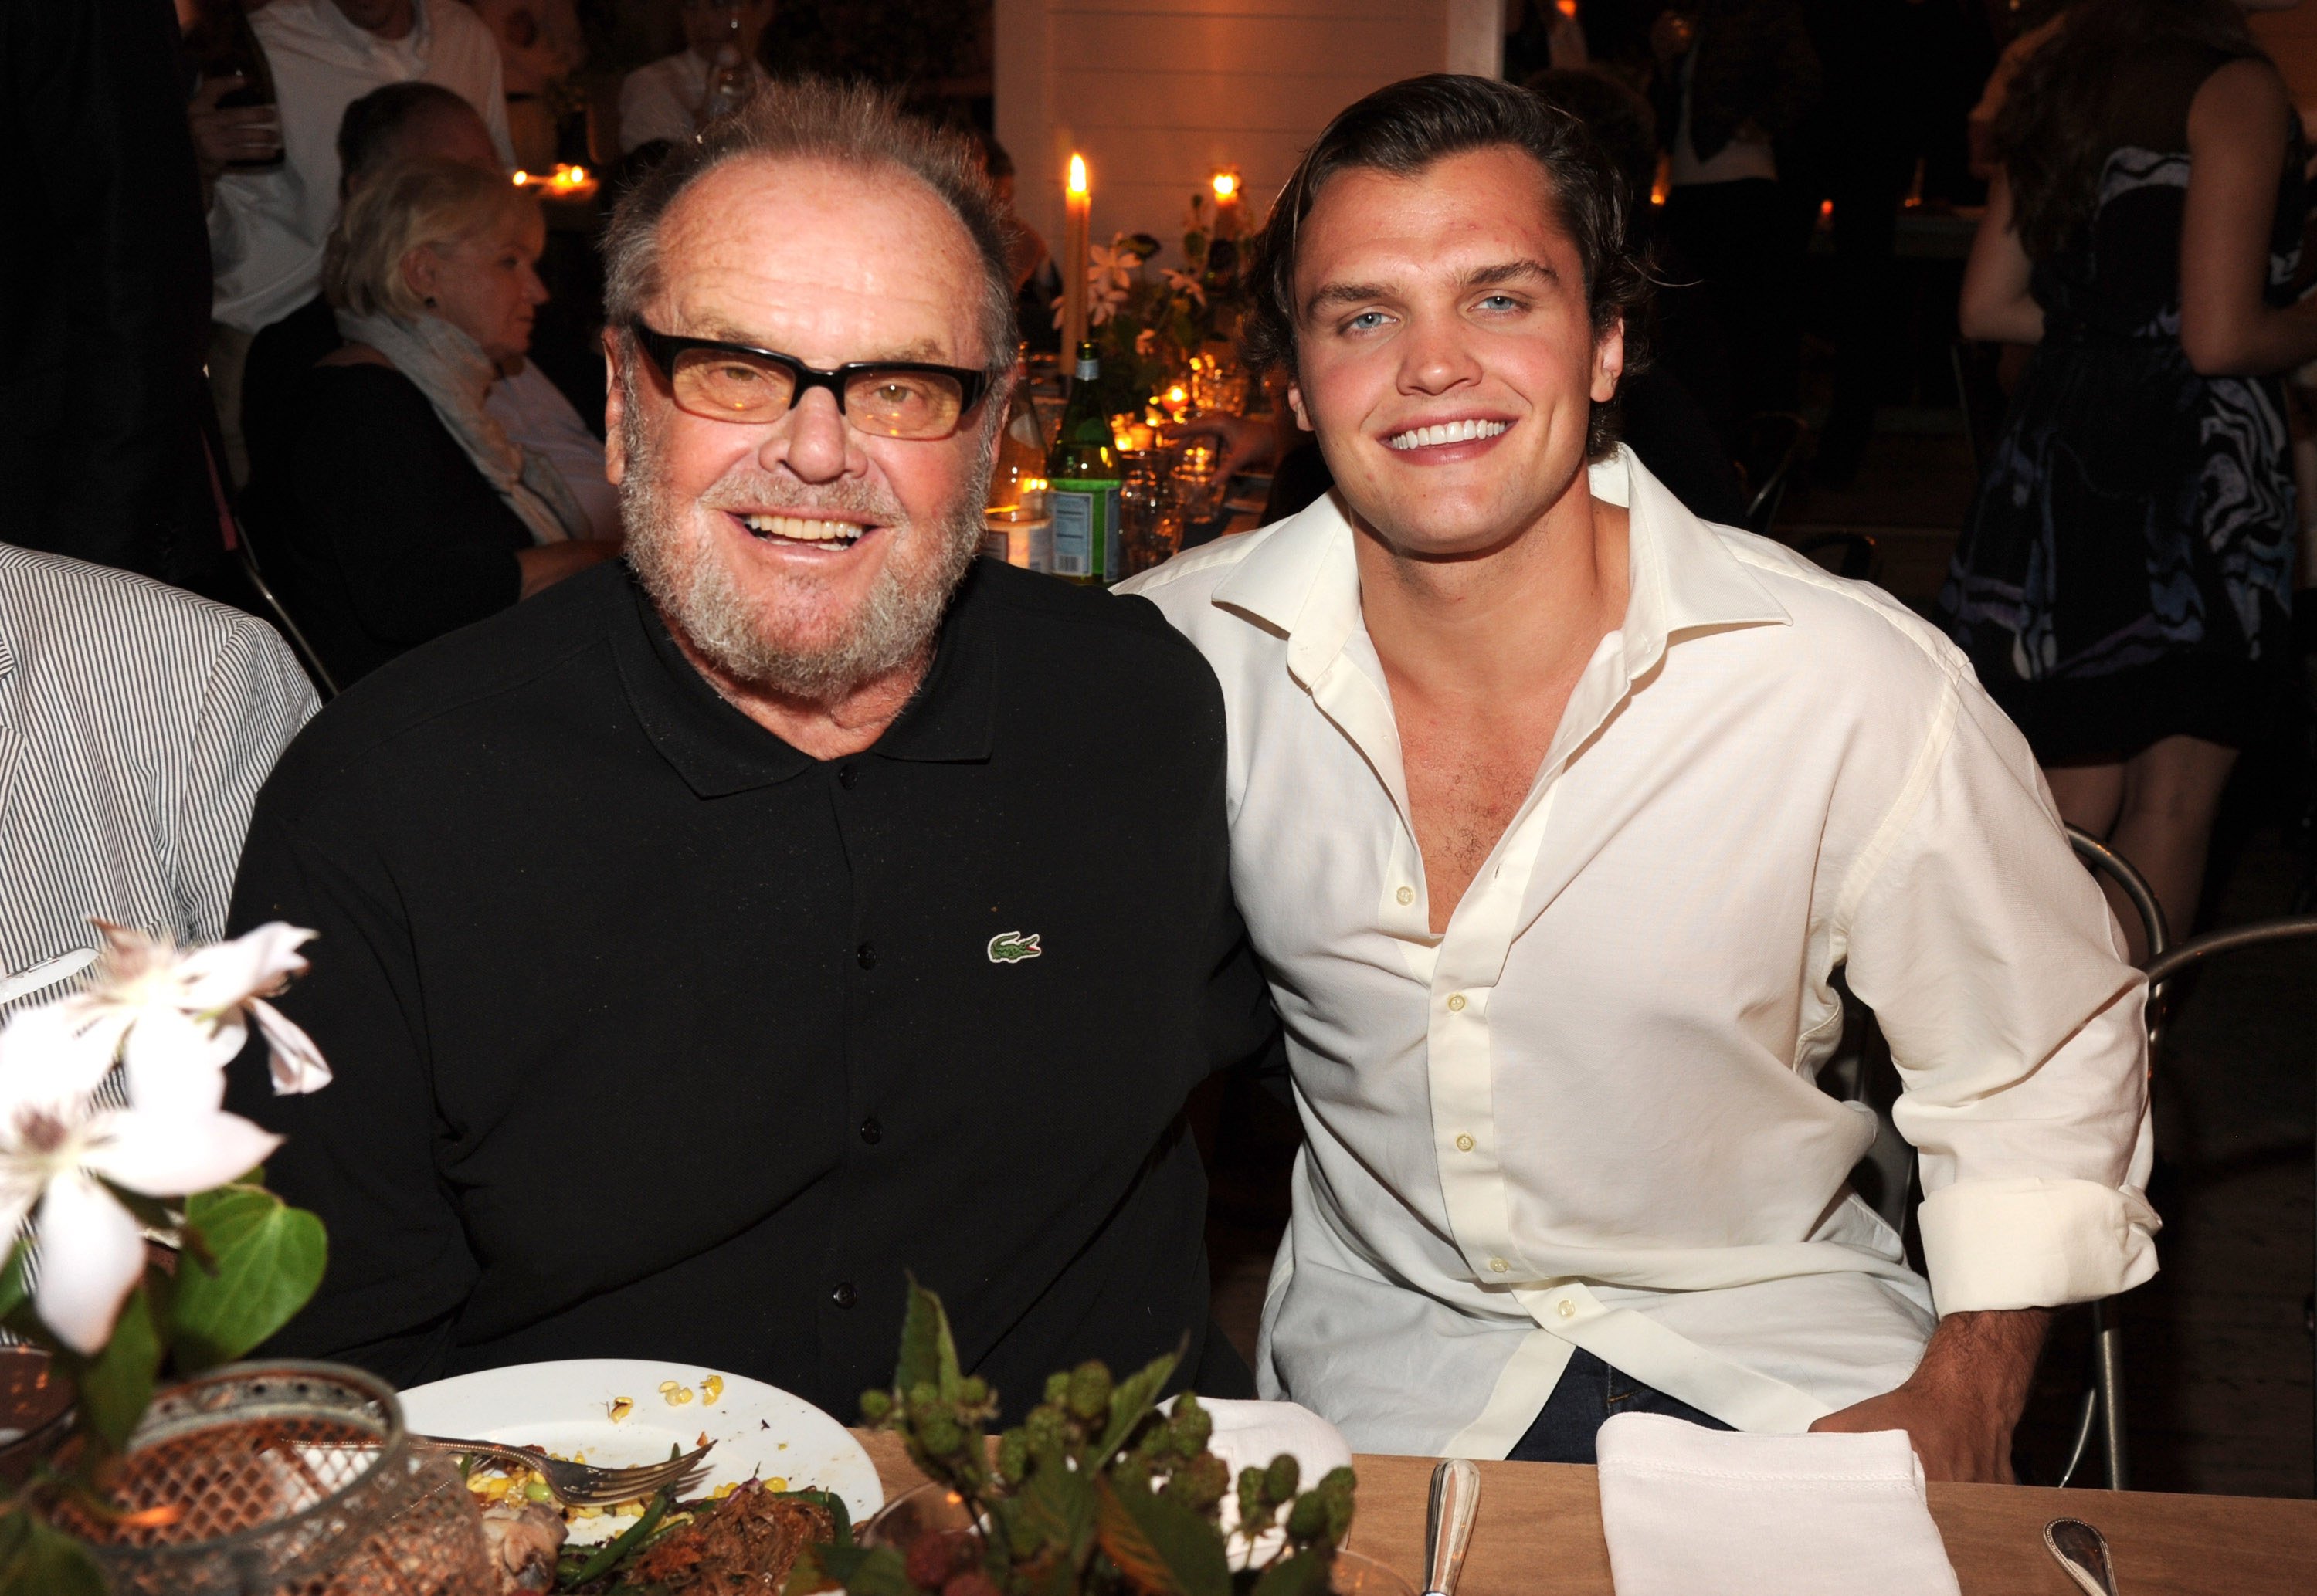 Who is Jack Nicholson's lookalike actor son, Ray? He's dating Victoria's  Secret model Sara Sampaio, has starred in films with Leo DiCaprio's ex  Camila Morrone, and loves NBA's LA Lakers like his